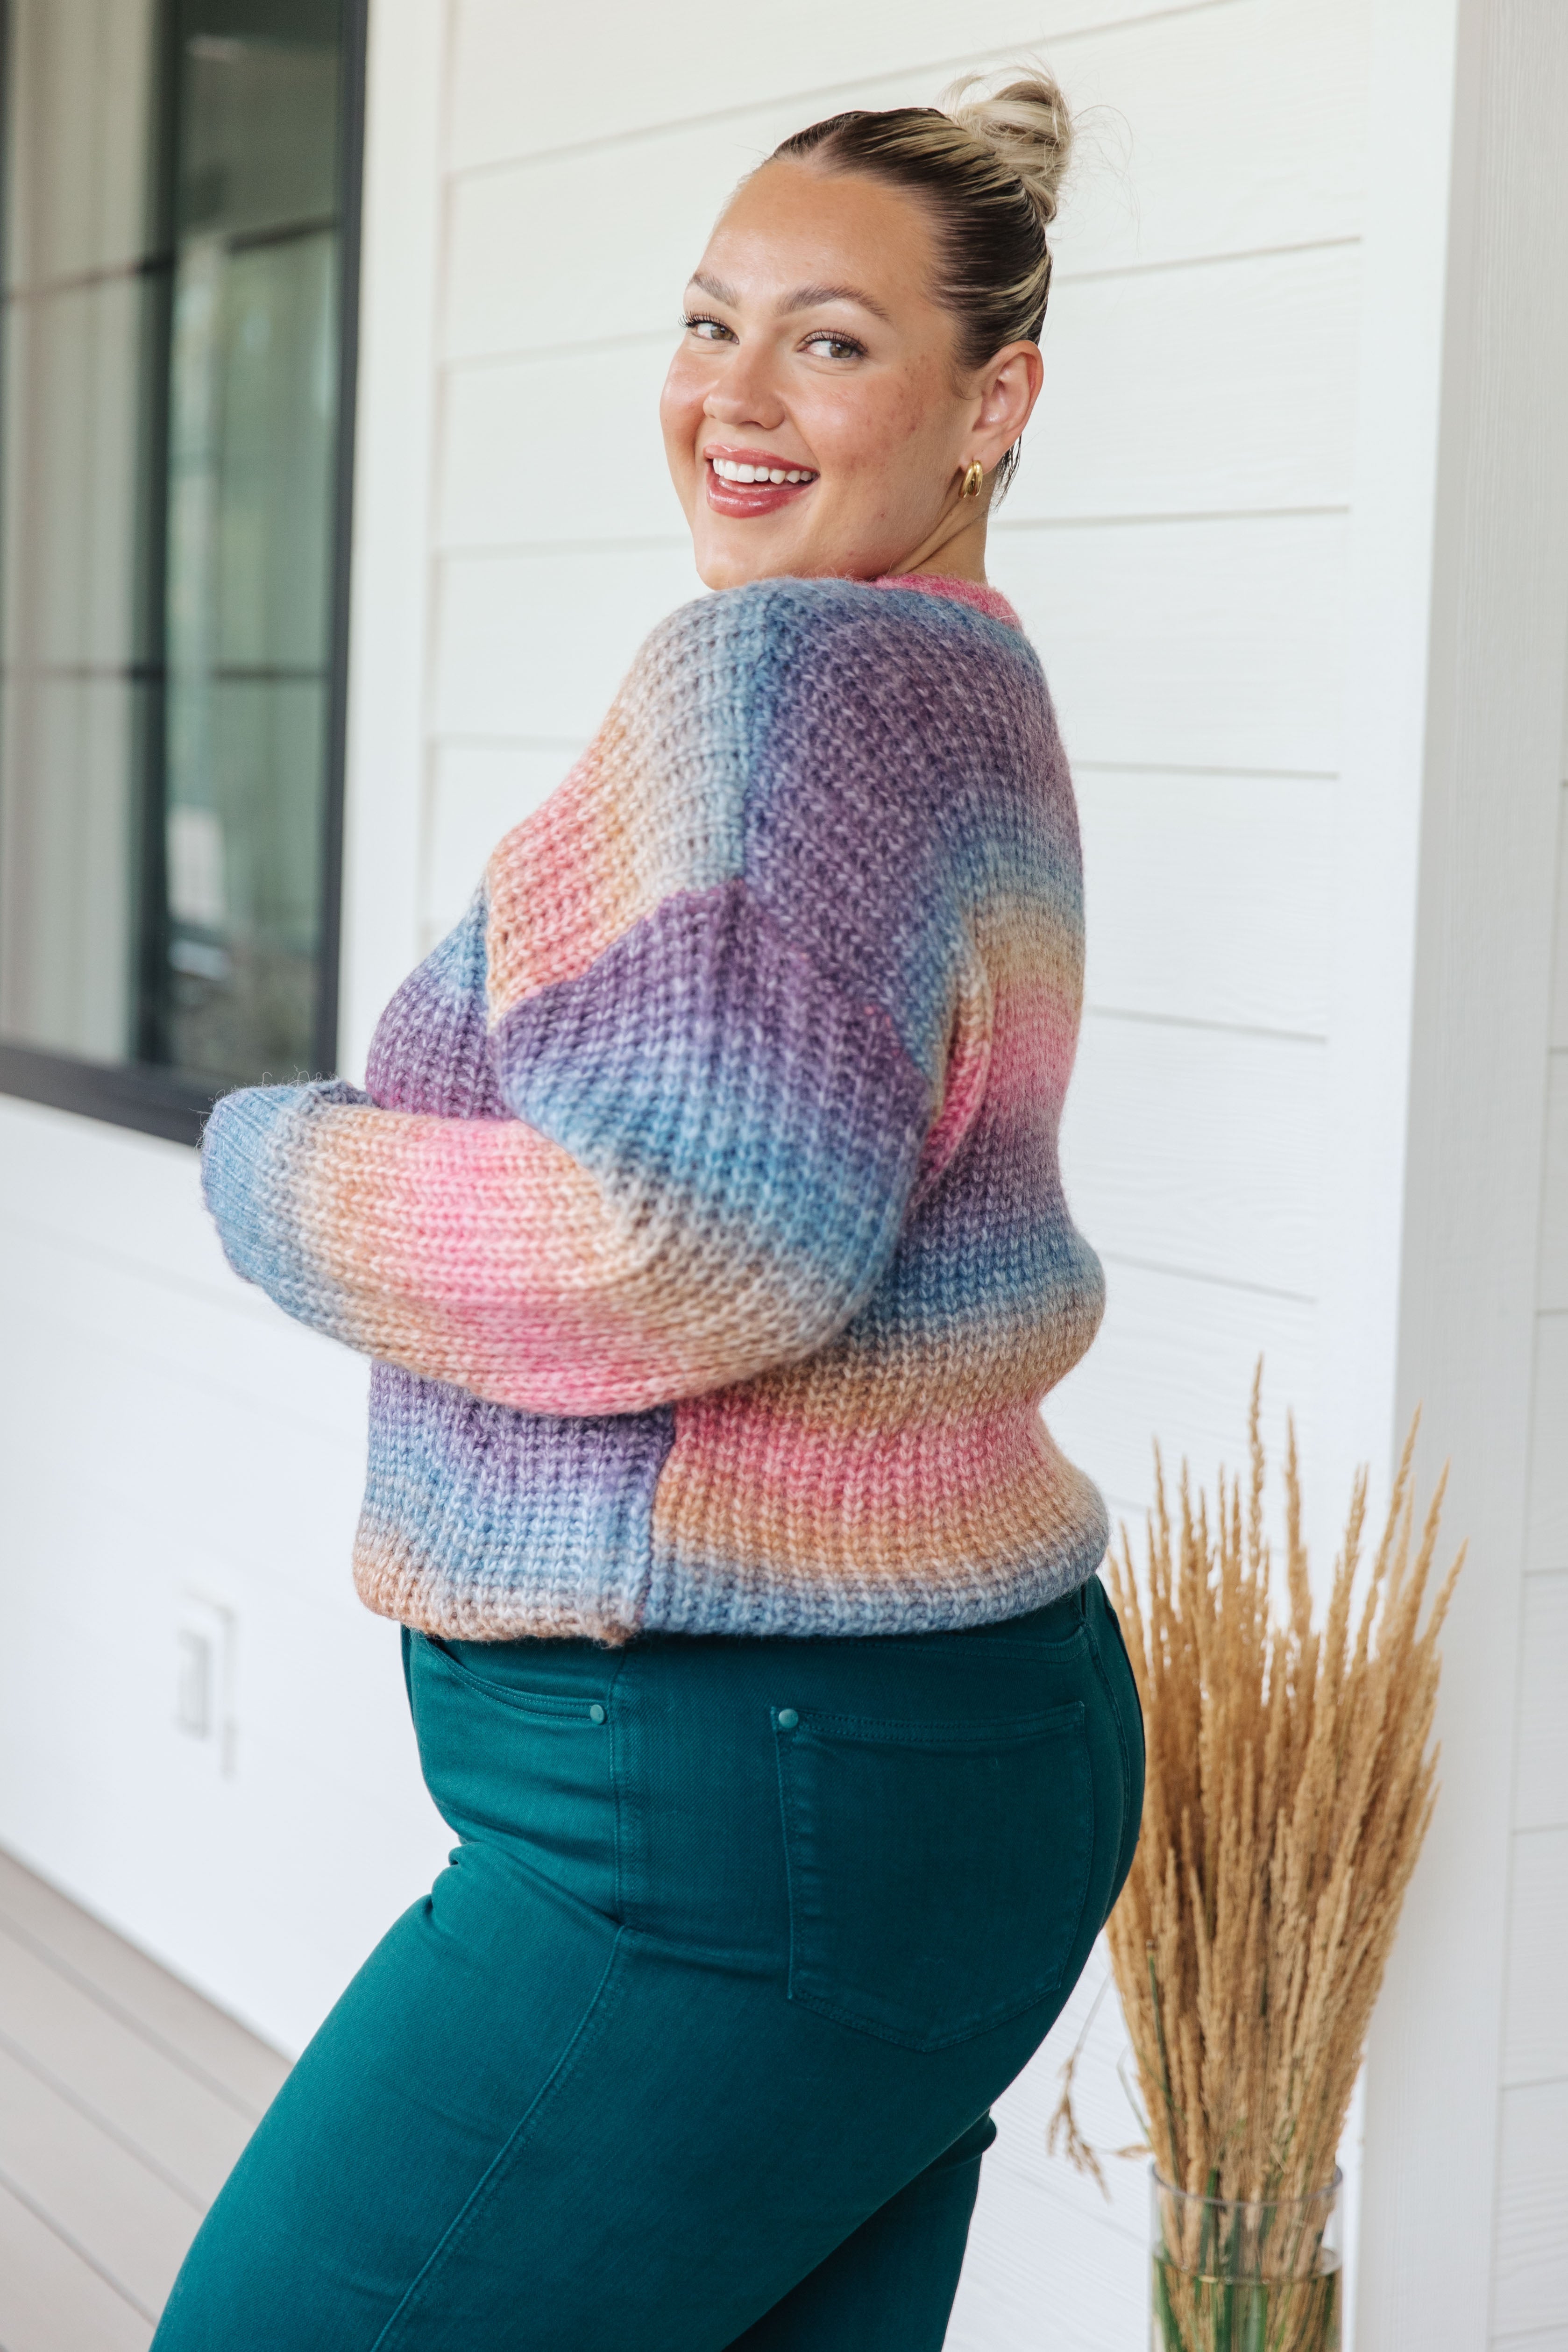 Make Your Own Kind of Music Rainbow Sweater - Lola Cerina Boutique